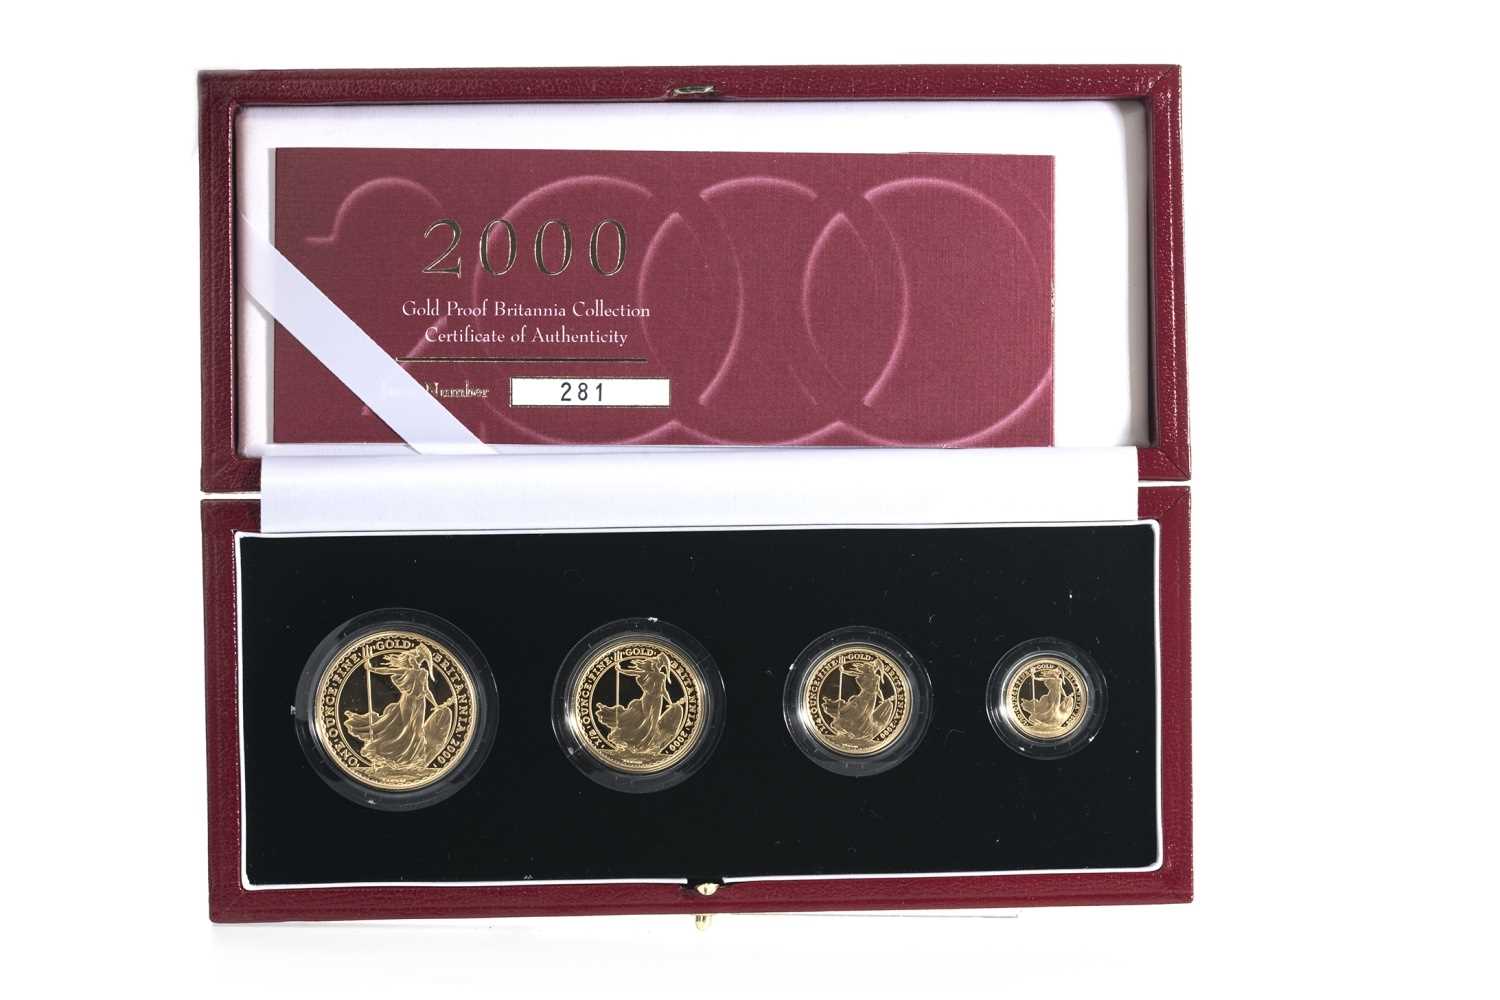 Lot 45 - 2000 GOLD PROOF BRITANNIA COLLECTION FOUR COIN SET